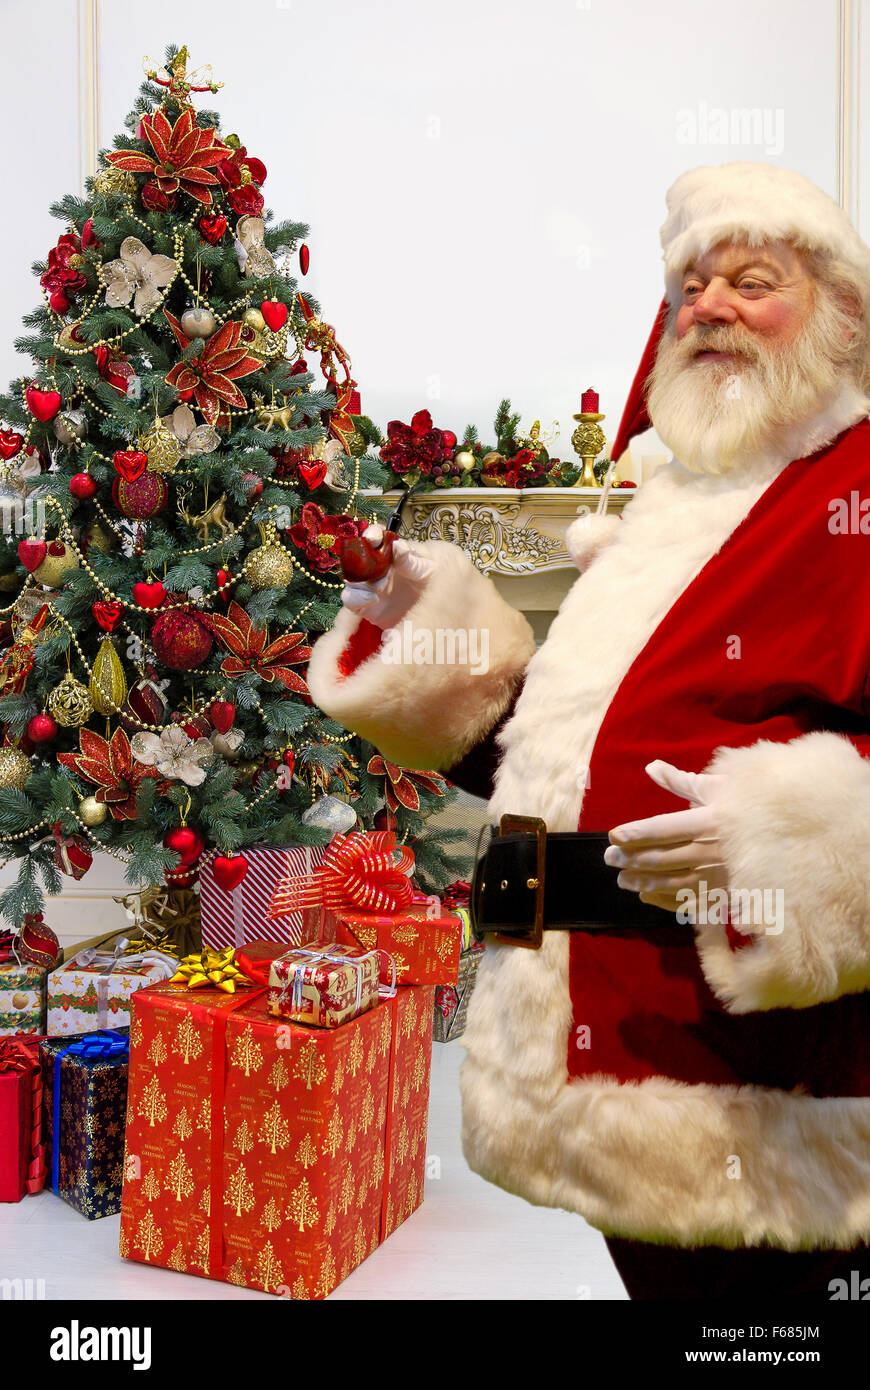 Santa Claus with a pipe Stock Photo